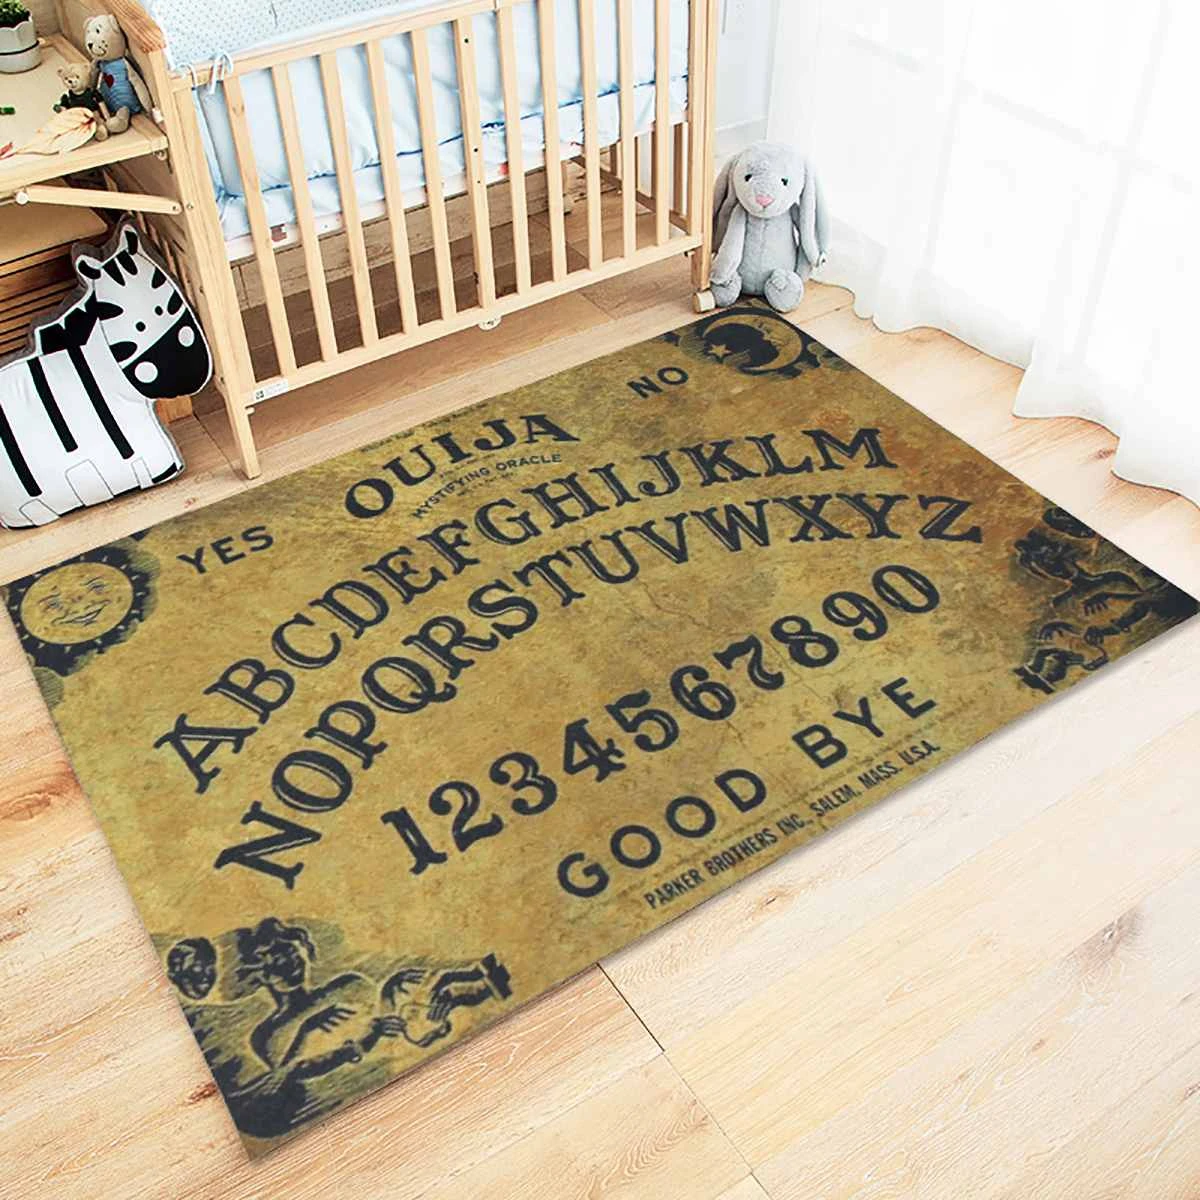 Ouija Board Art Area Rug 5'x 7' Educational Polyester Area Rug Mat for Living Dining Dorm Room Bedroom Home Decorative 